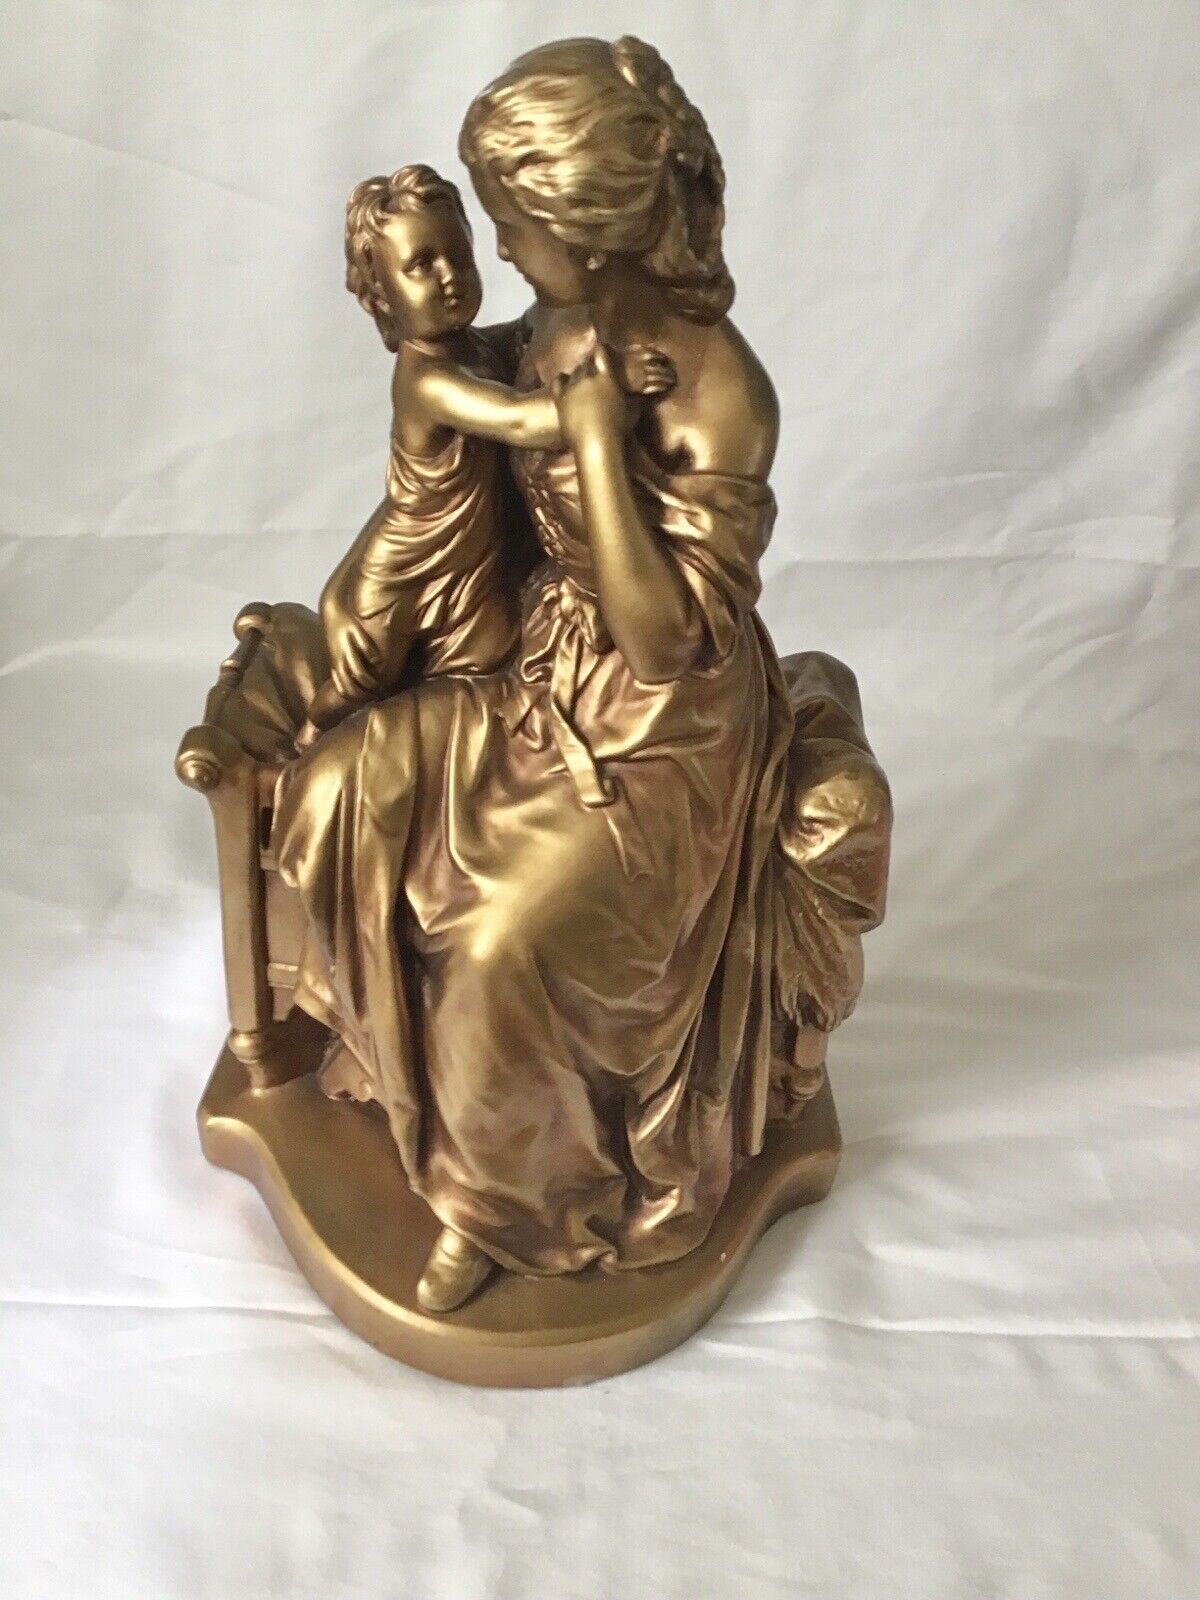 Mother & Child Statue by Artistic Royal Krafts #1805, 16” Tall Chalk Plaster.